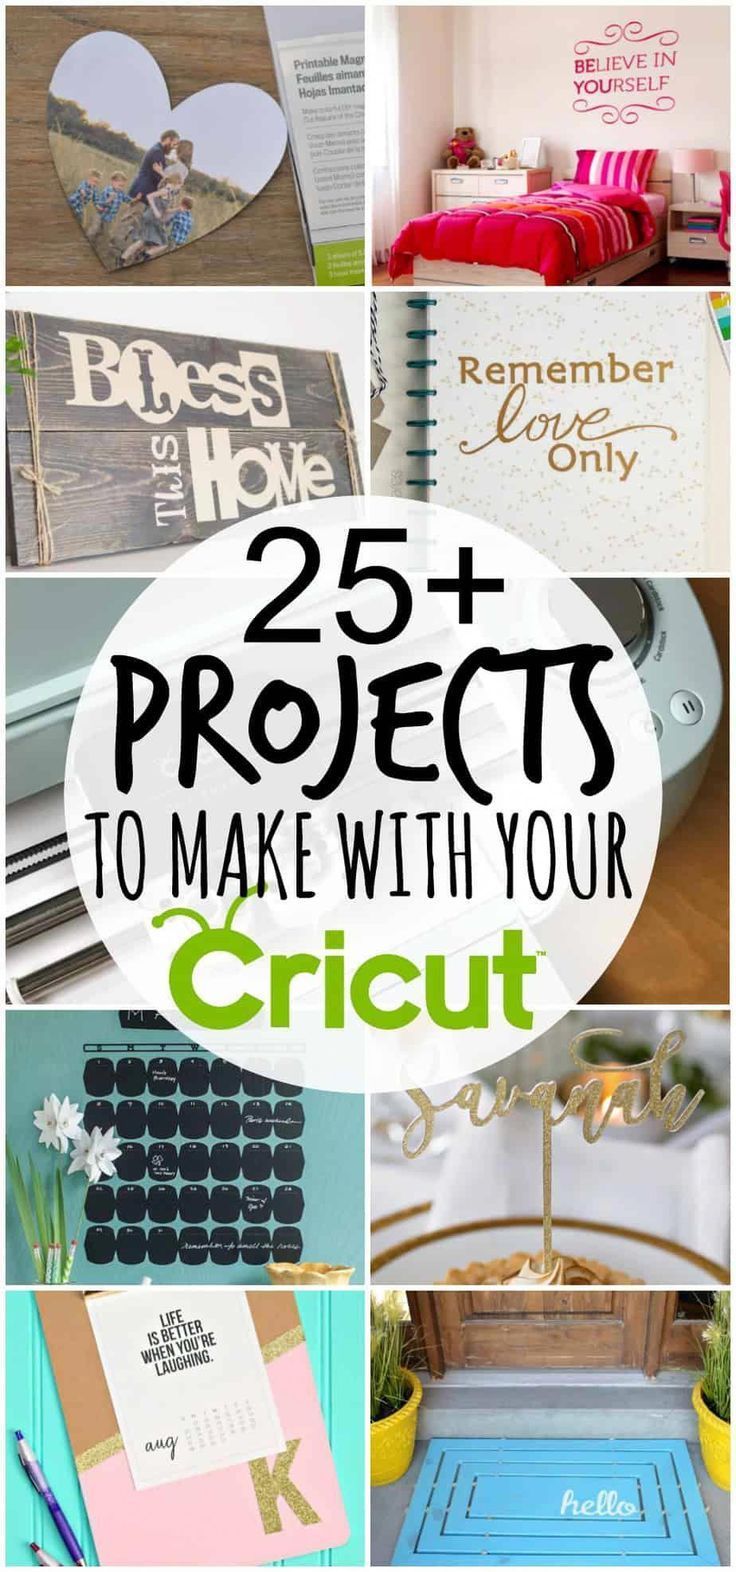 What Can I Make with My Cricut? - Fabulous Cricut Projects -   20 diy projects to sell ideas